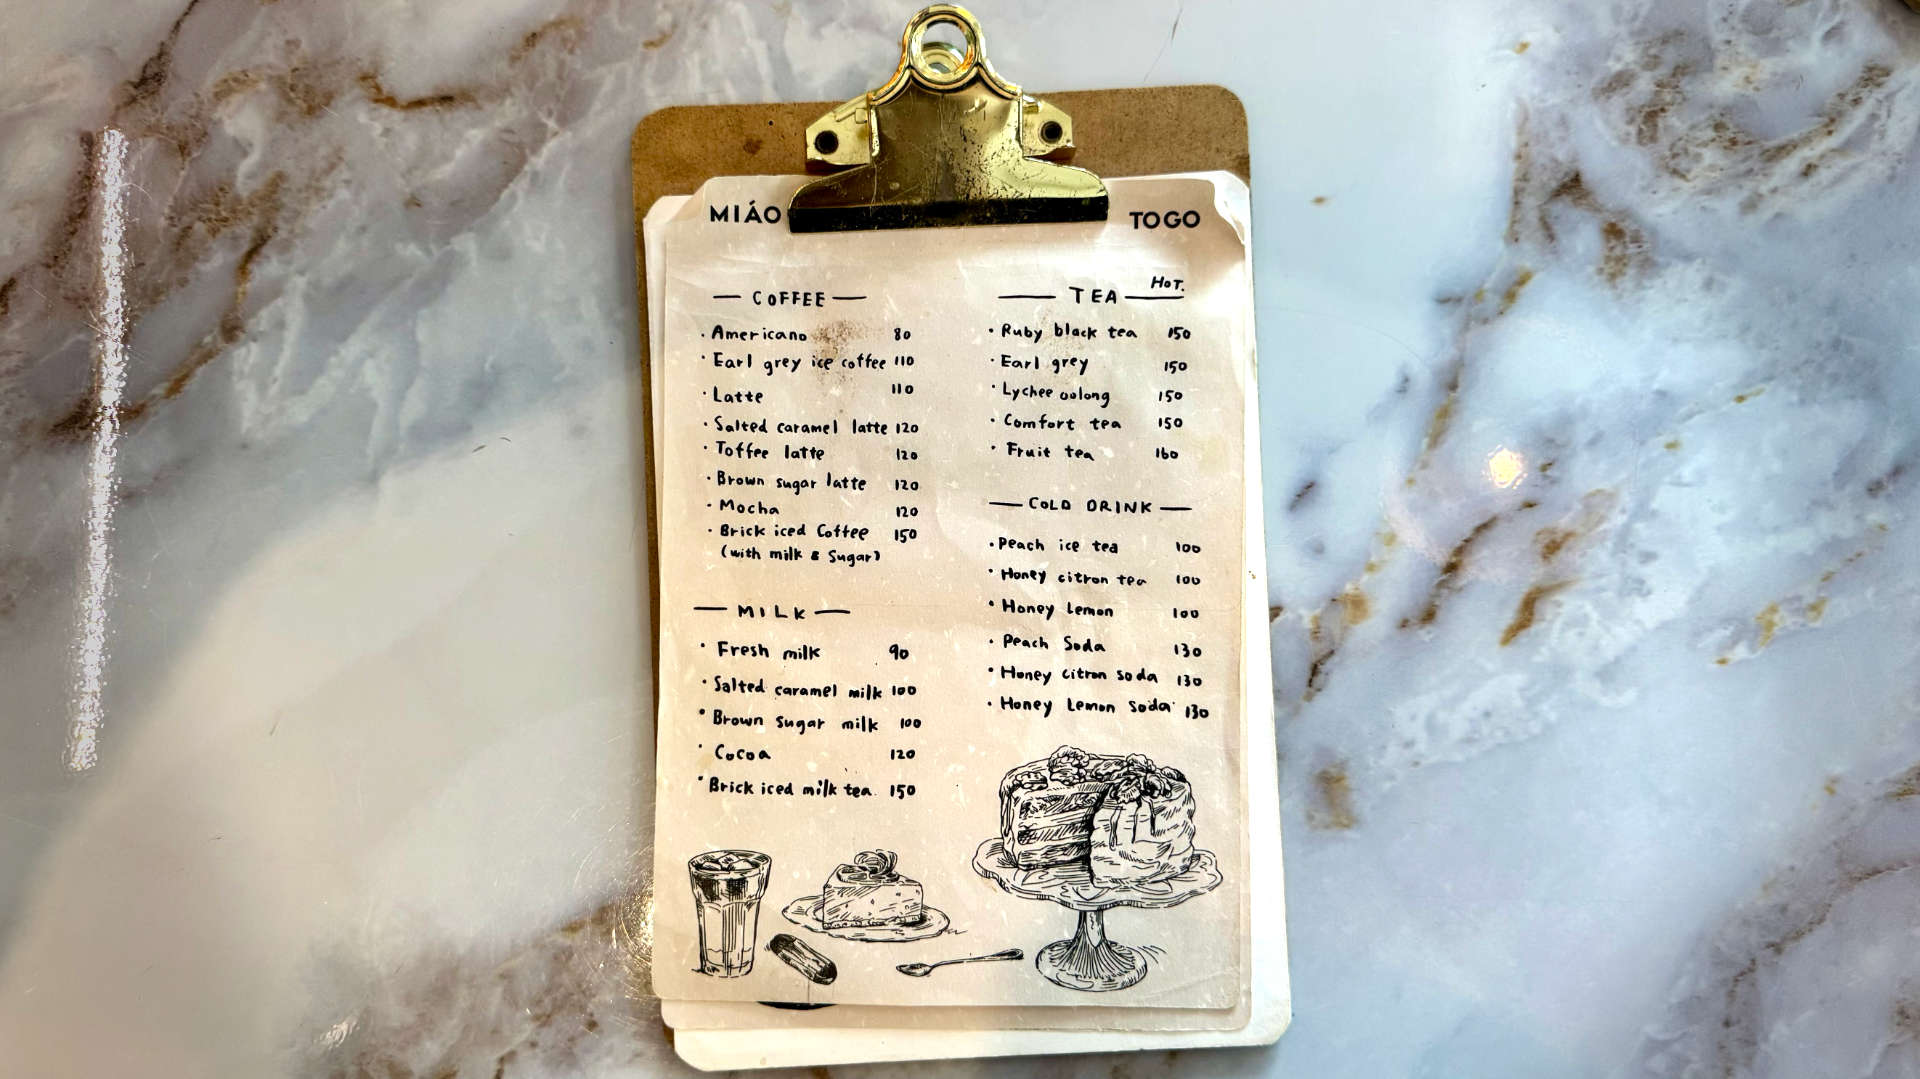 A hand-written menu in English. The front page has four categories: coffee, milk, tea, and cold drink.